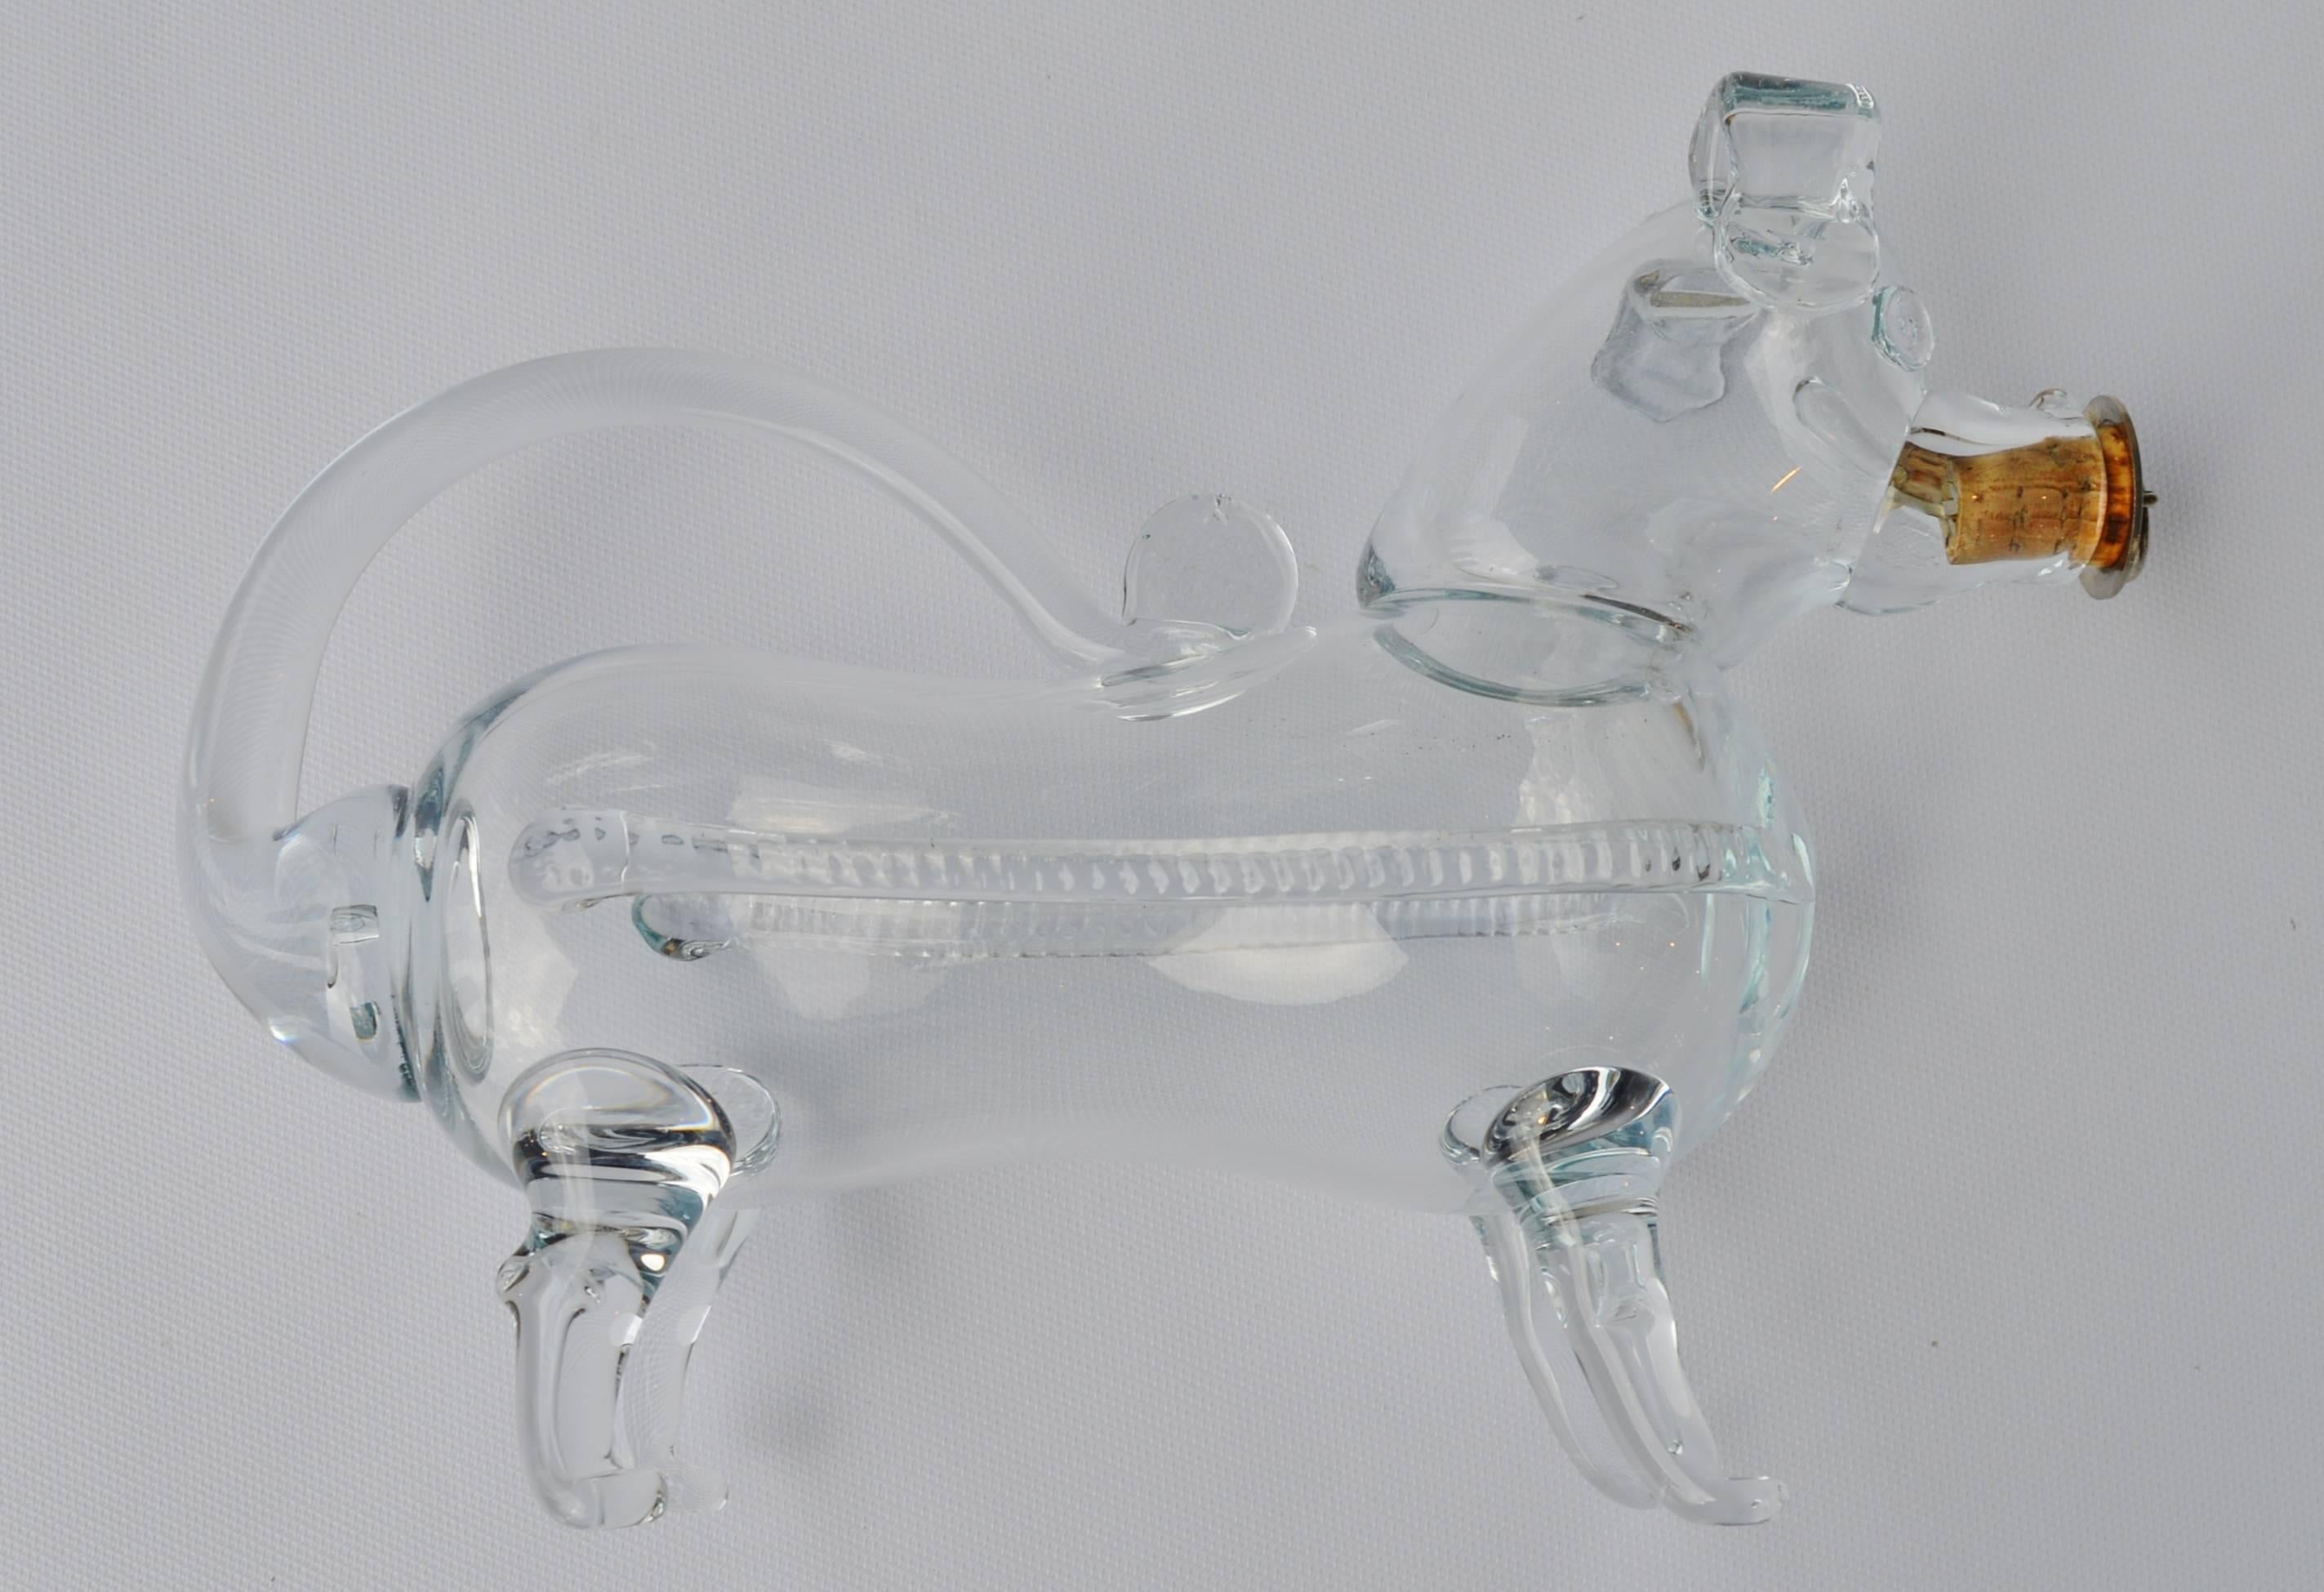 A whimsical dog-form decanter handblown in clear glass with the cork in his snout and the tail forming the carrying handle. This type of decanter is also referred to also as a gin pig, and was made by Holmegaard Glassworks and is in excellent